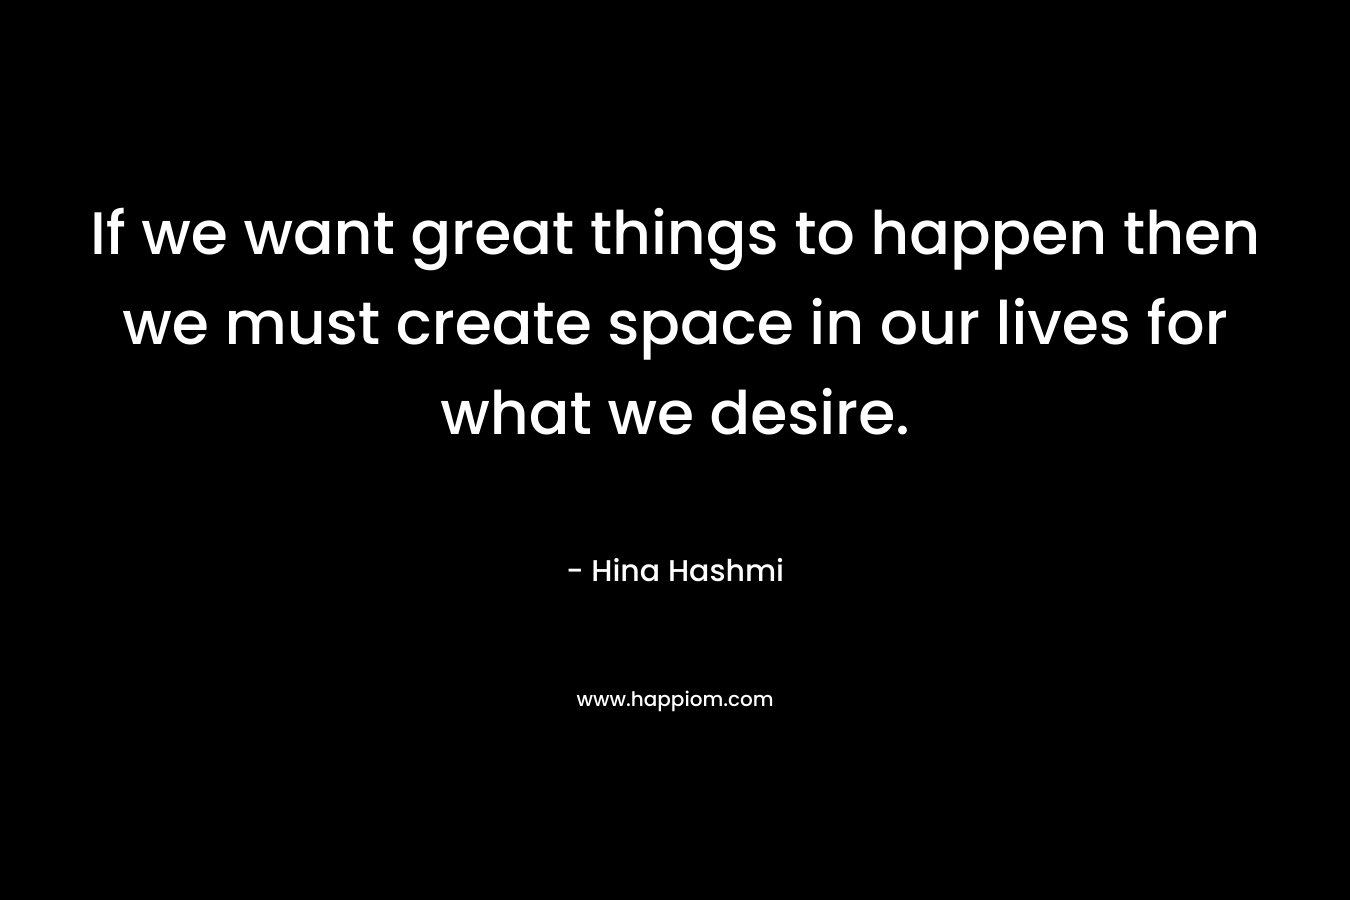 If we want great things to happen then we must create space in our lives for what we desire.